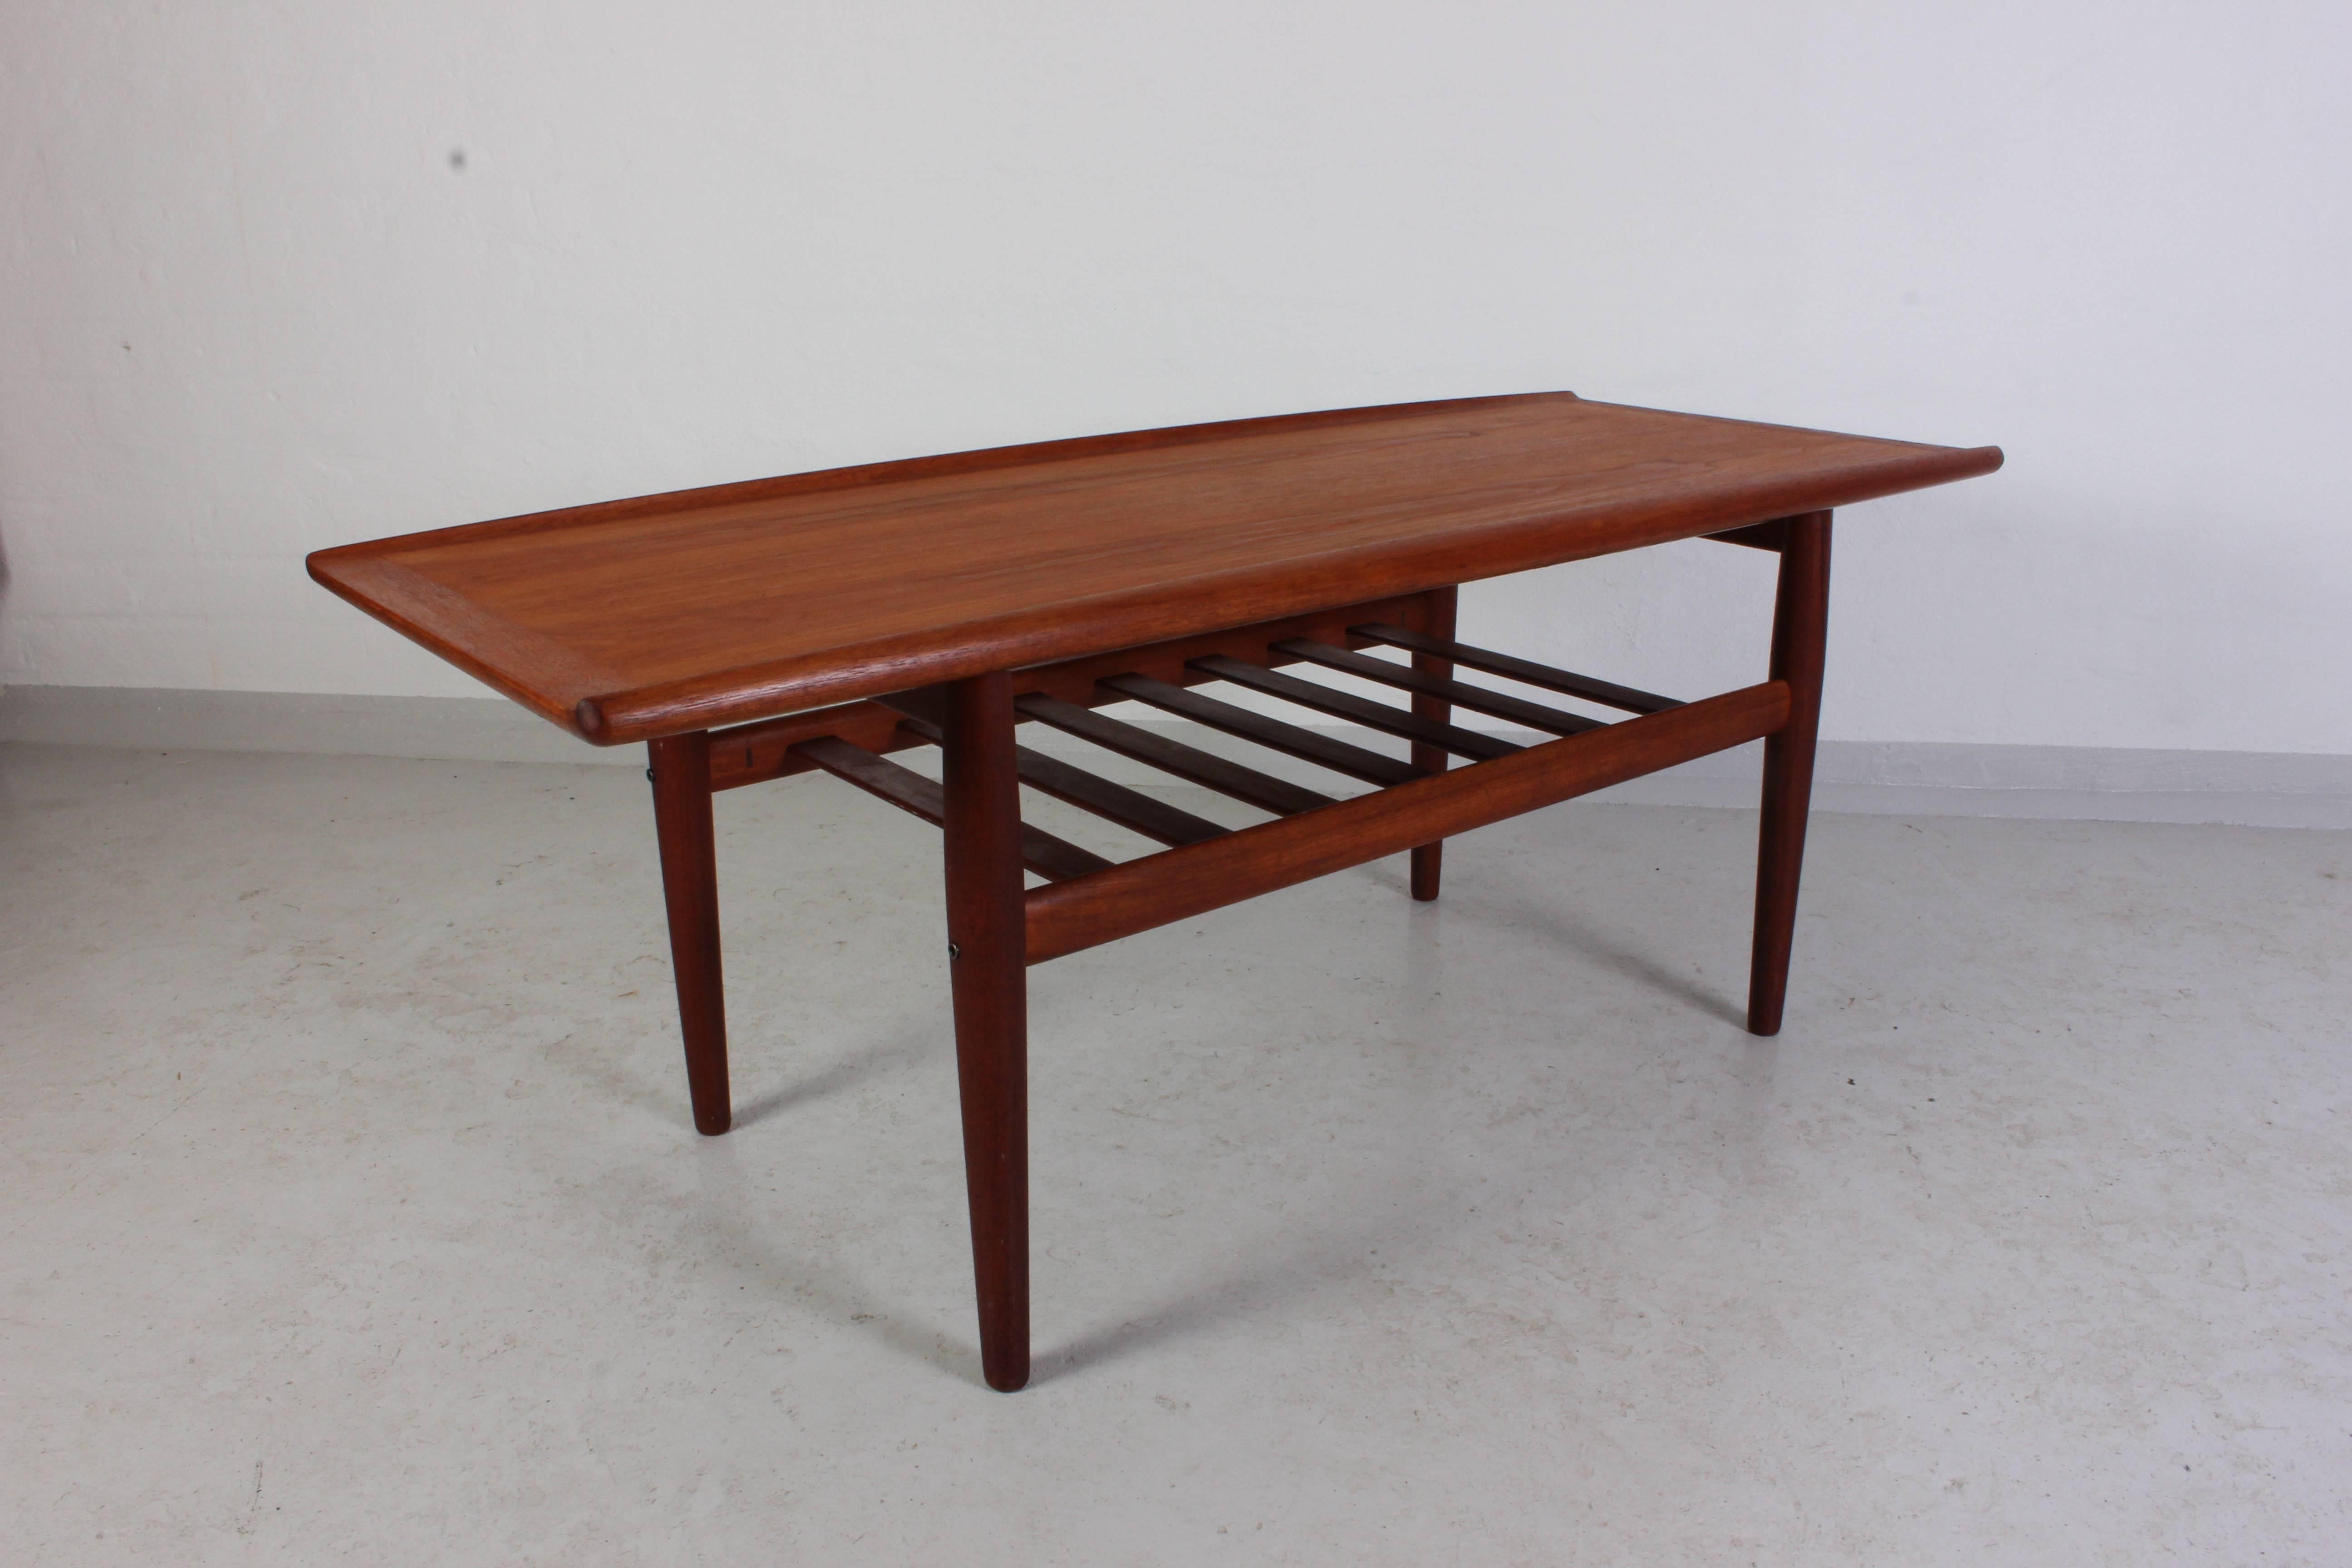 Midcentury teak coffee table by Danish designer Grete Jalk produced by manufacturer Glostrup. The table is made out of solid teak and the shelf underneath the top is mounted with brass fittings. This high quality coffee table is in very good vintage